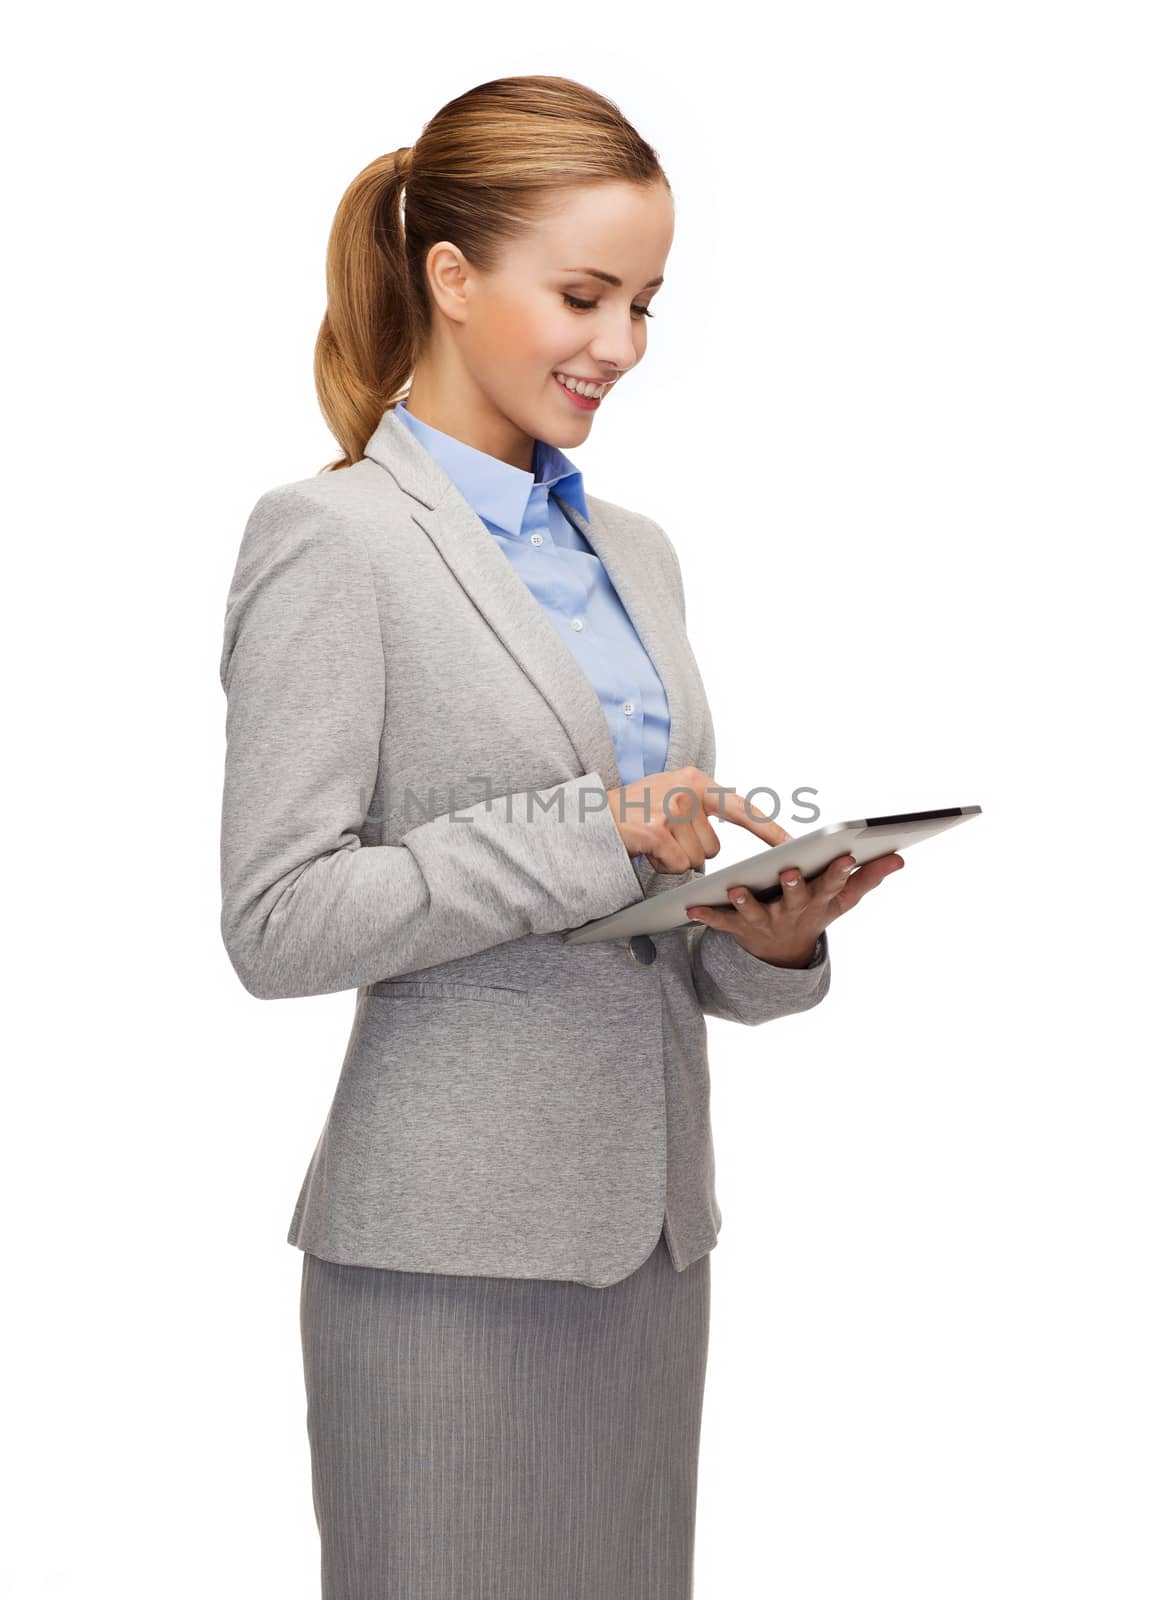 business, internet and technology concept - smiling woman looking at tablet pc computer